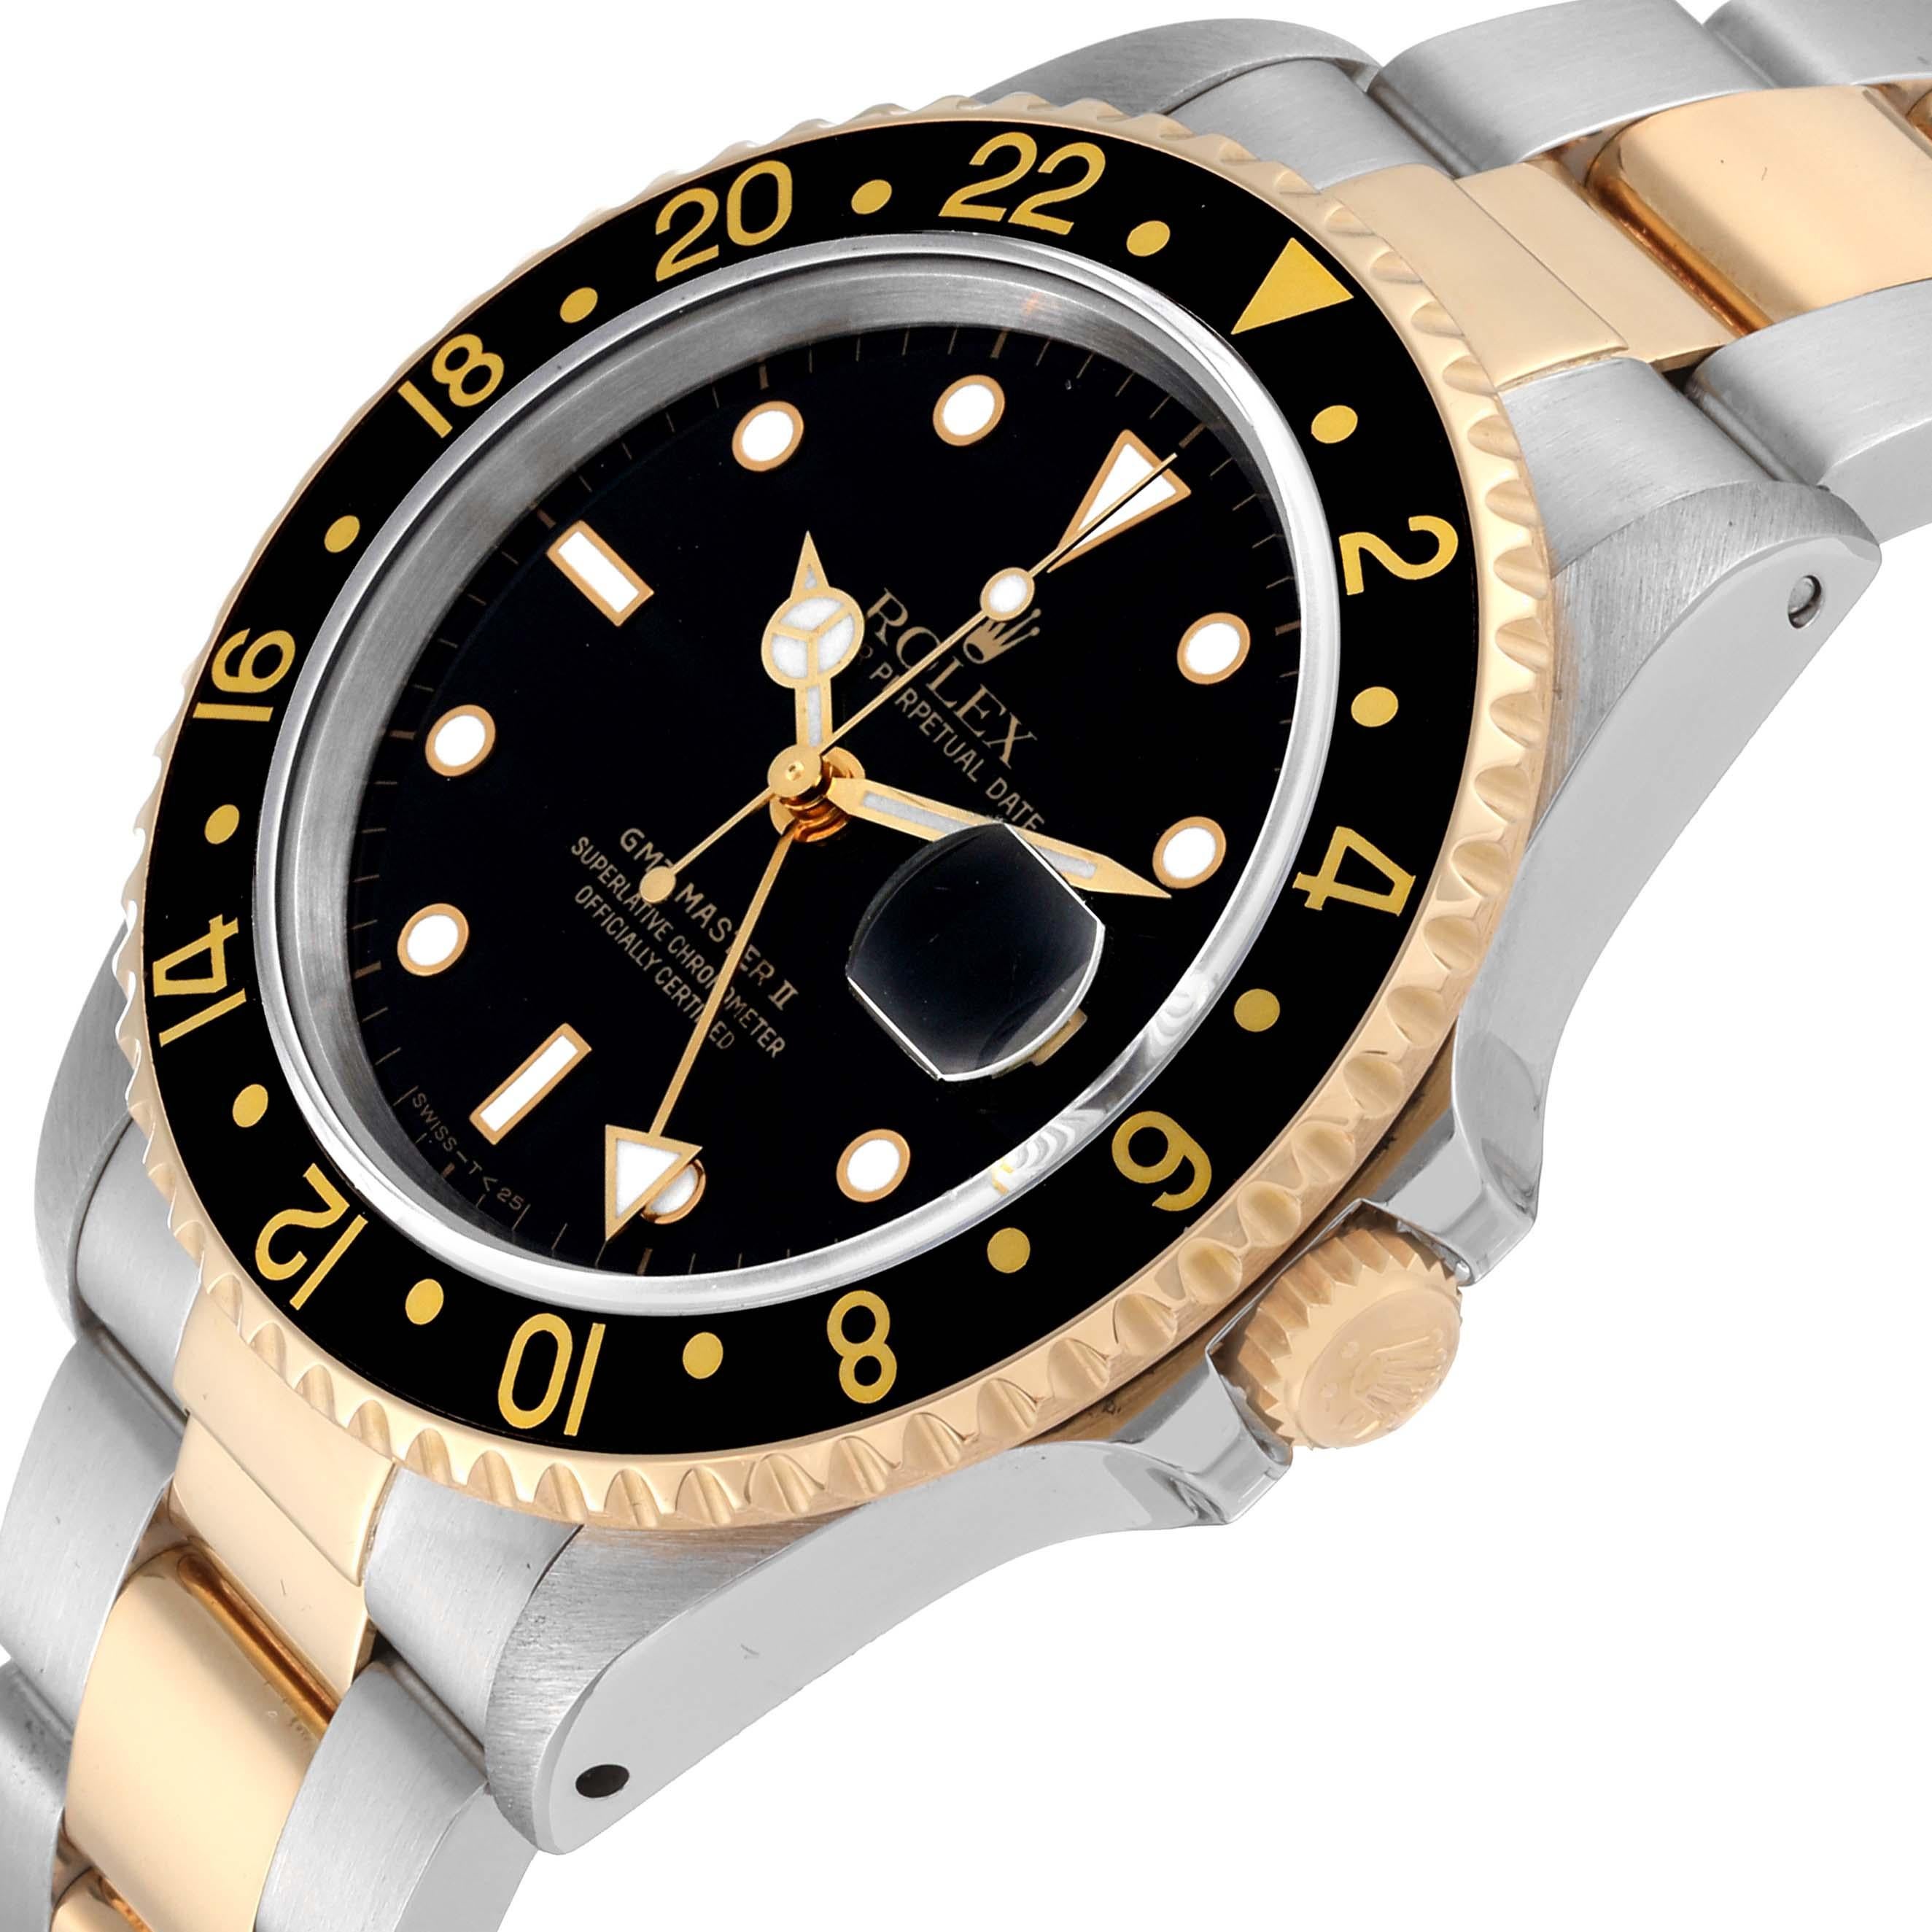 Rolex GMT Master II Black Dial Yellow Gold Steel Mens Watch 16713 For Sale 1